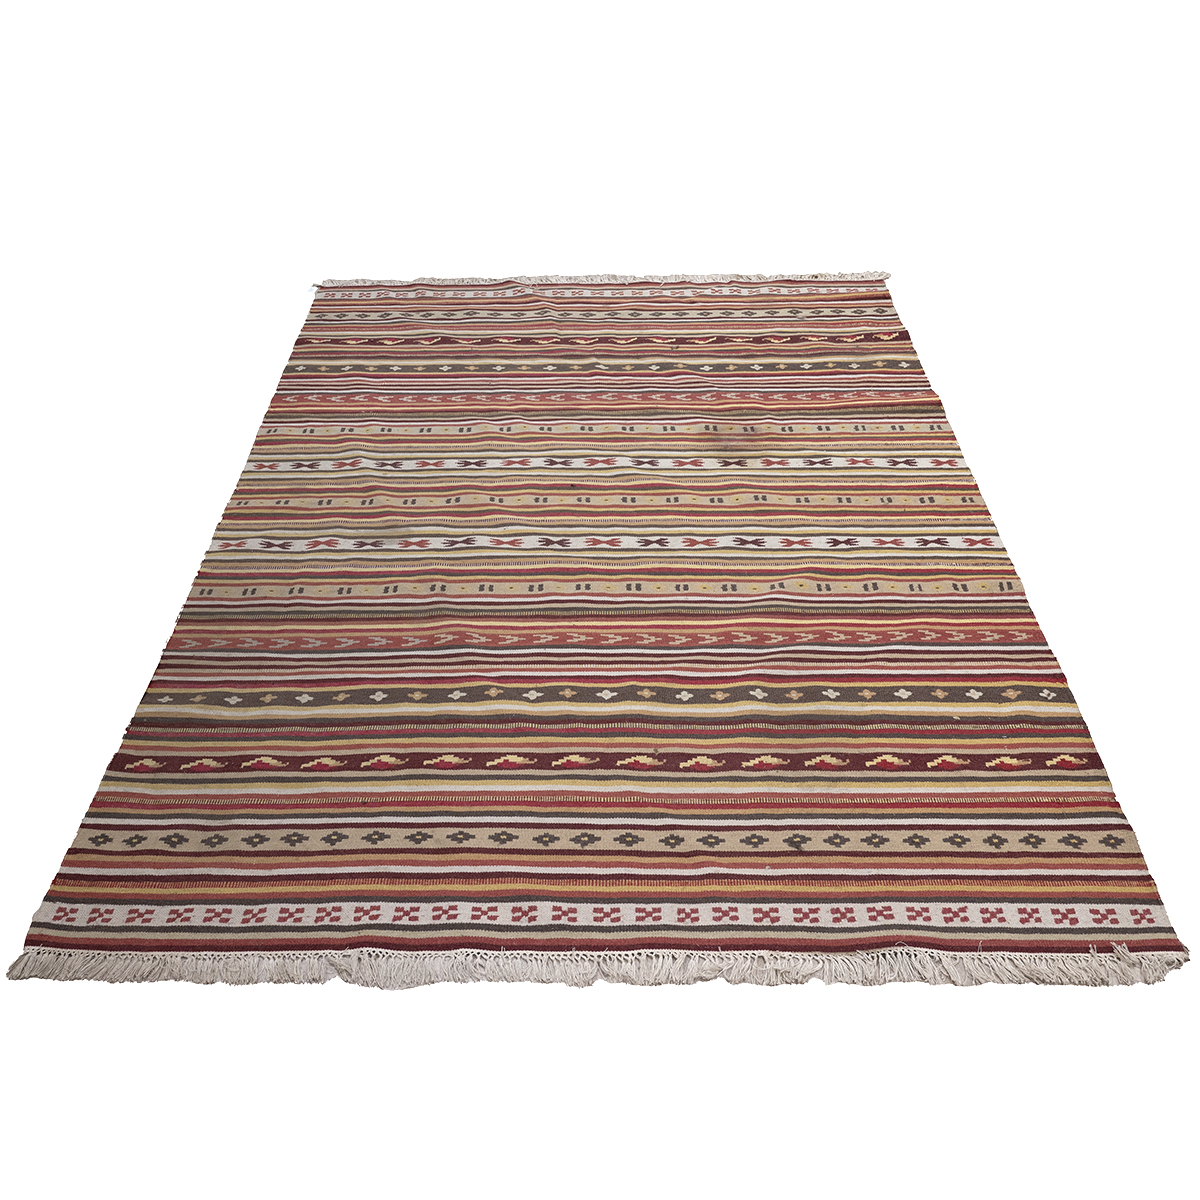 Vintage kilim rug, hand-knotted with a multi-coloured ground, with repeating patterns throughout....